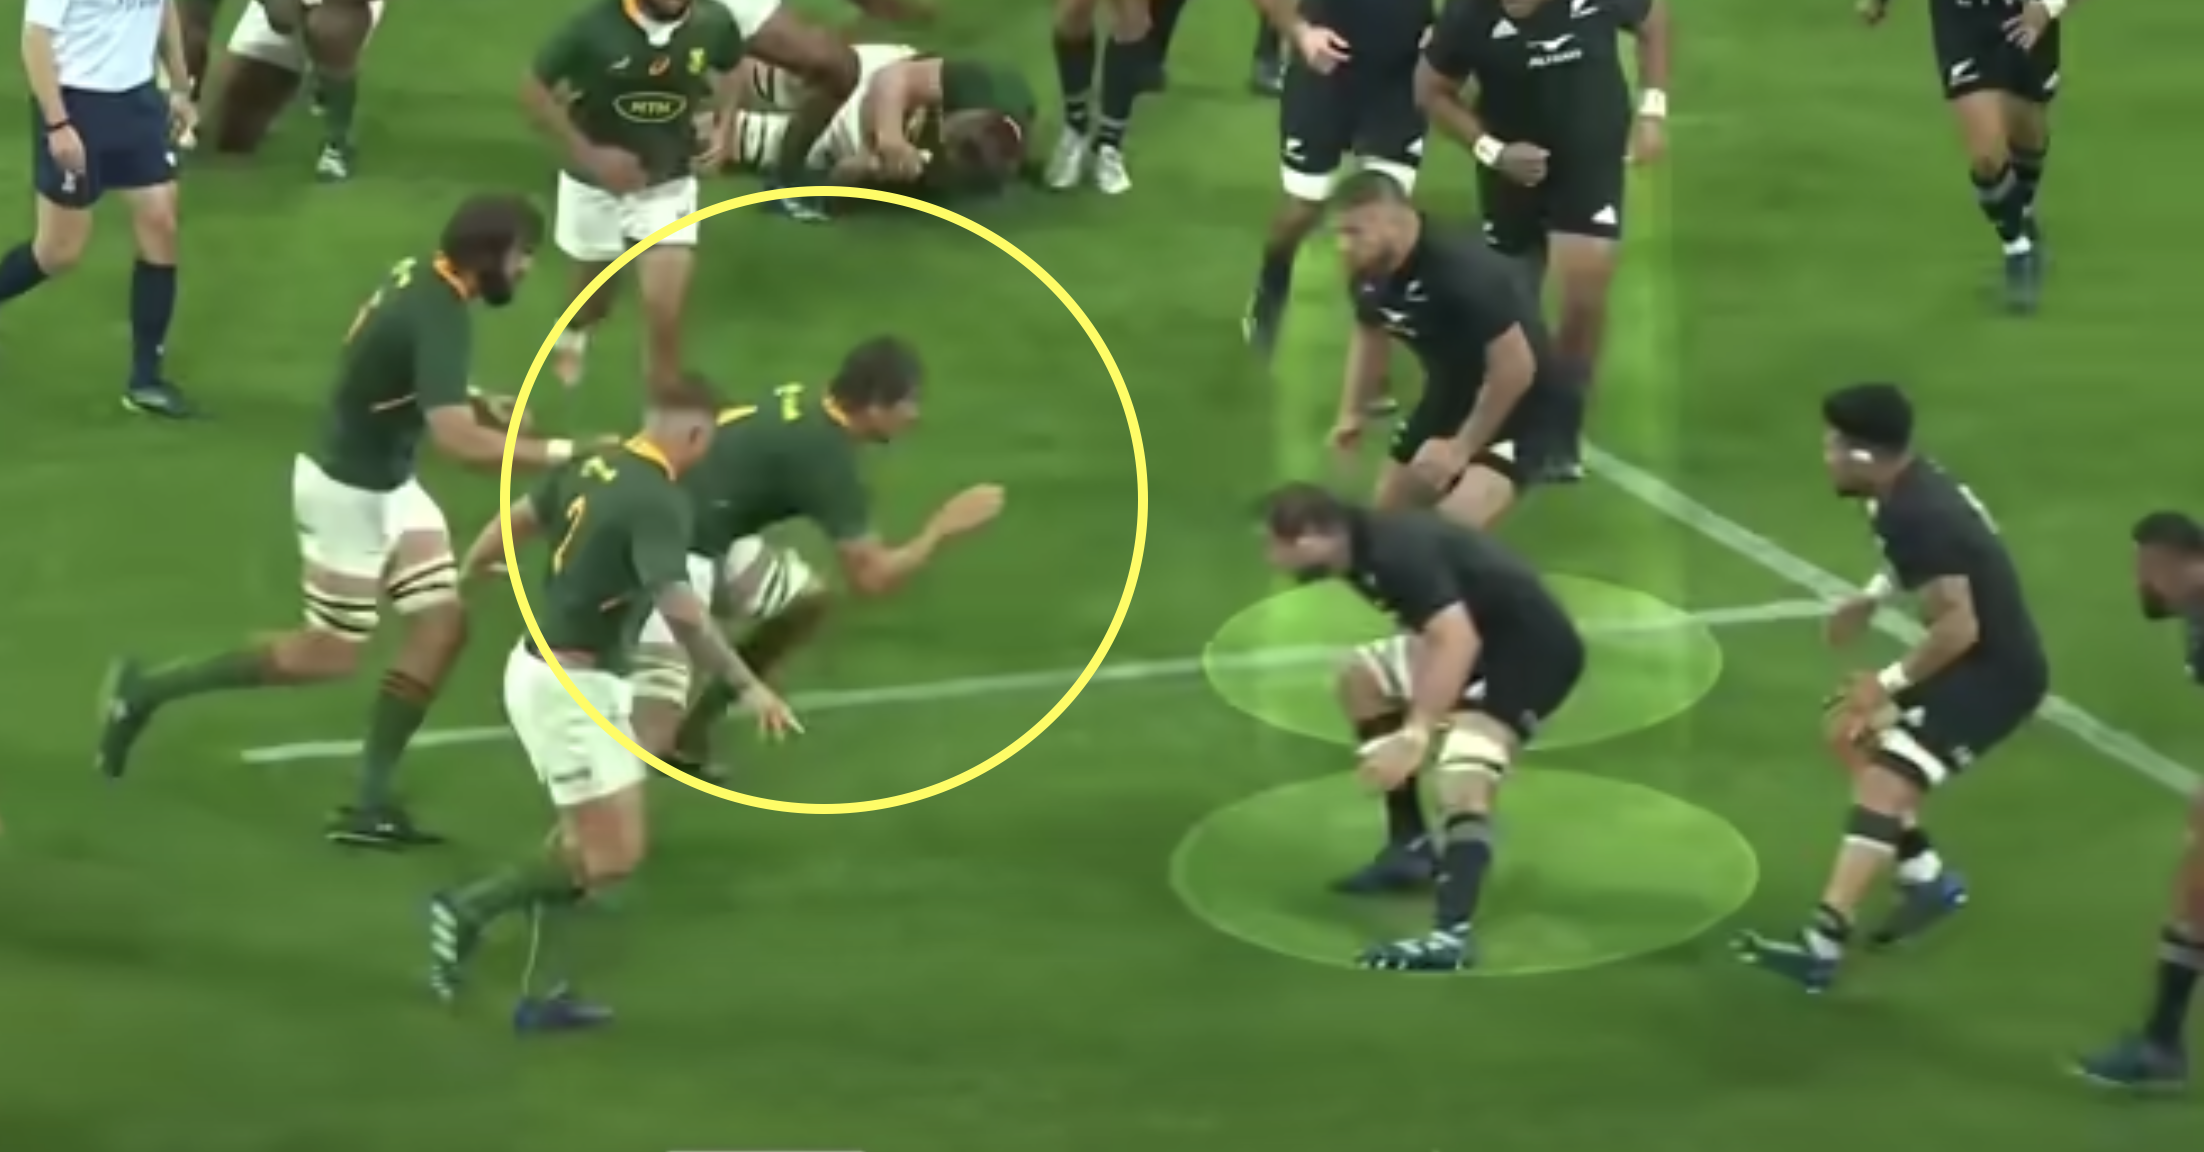 South Africa and All Blacks are both guilty of hugely dangerous tackles